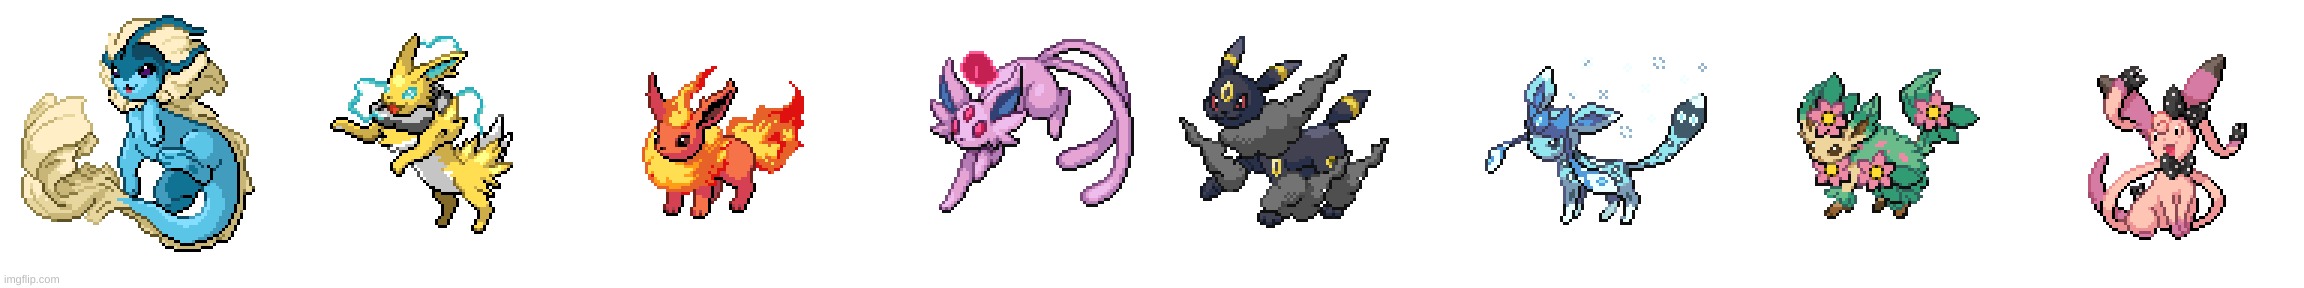 The elemental Eeveelutions side-by-side (Now with Elemental Espeon) | image tagged in elemental,elemental eeveelutions,pokemon,fusion,eeveelutions | made w/ Imgflip meme maker